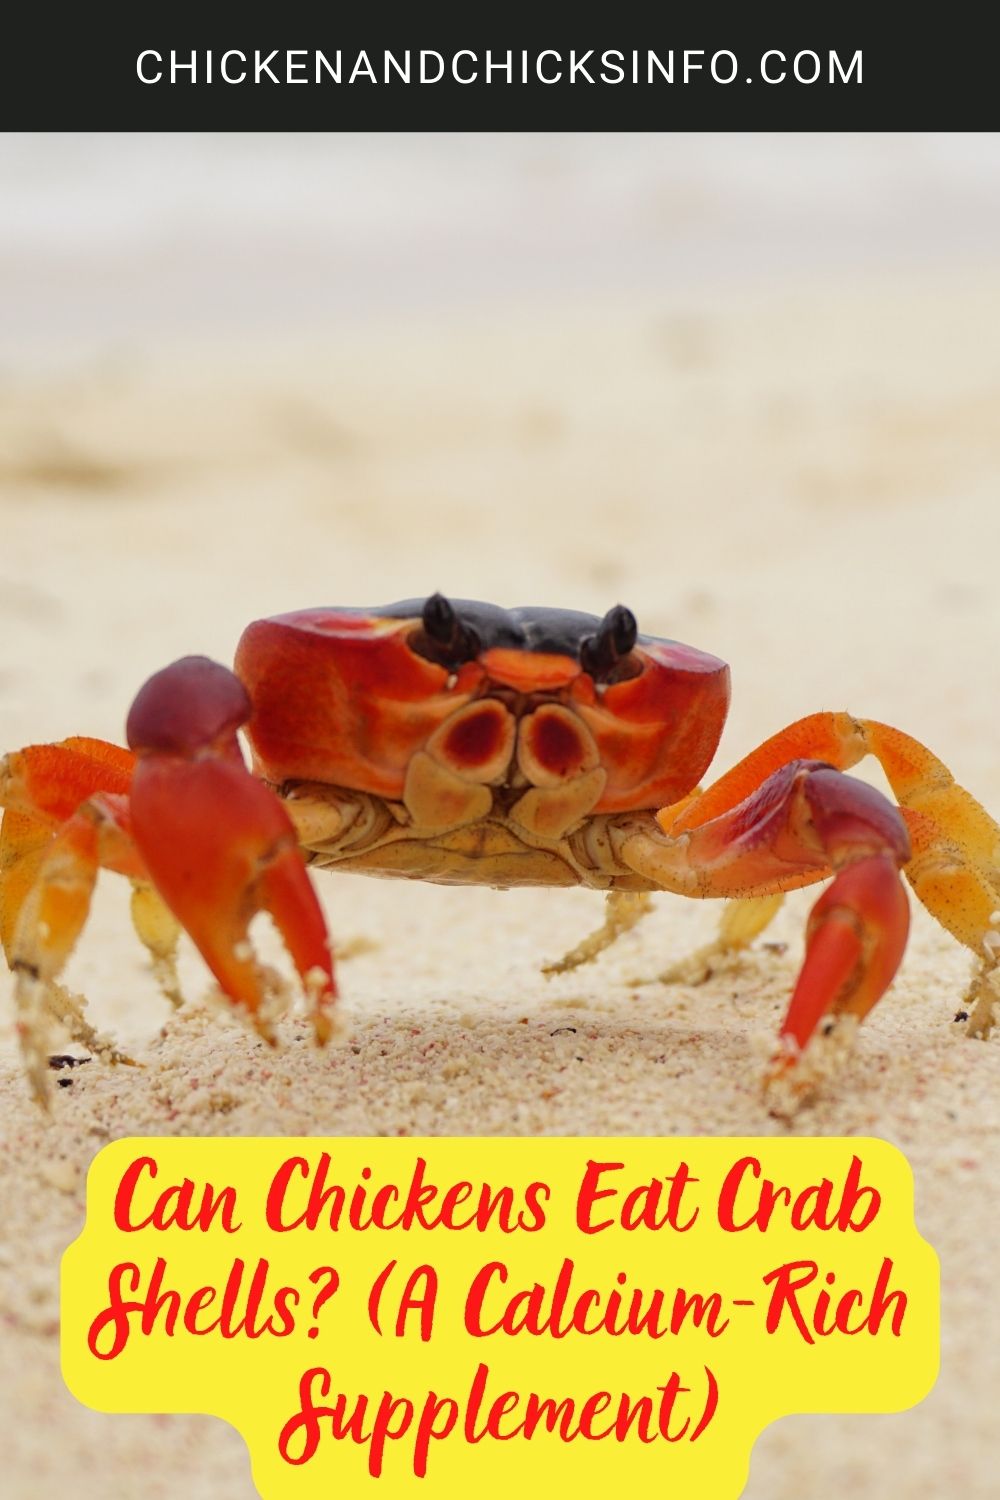 Can Chickens Eat Crab Shells? (A Calcium-Rich Supplement) poster.
